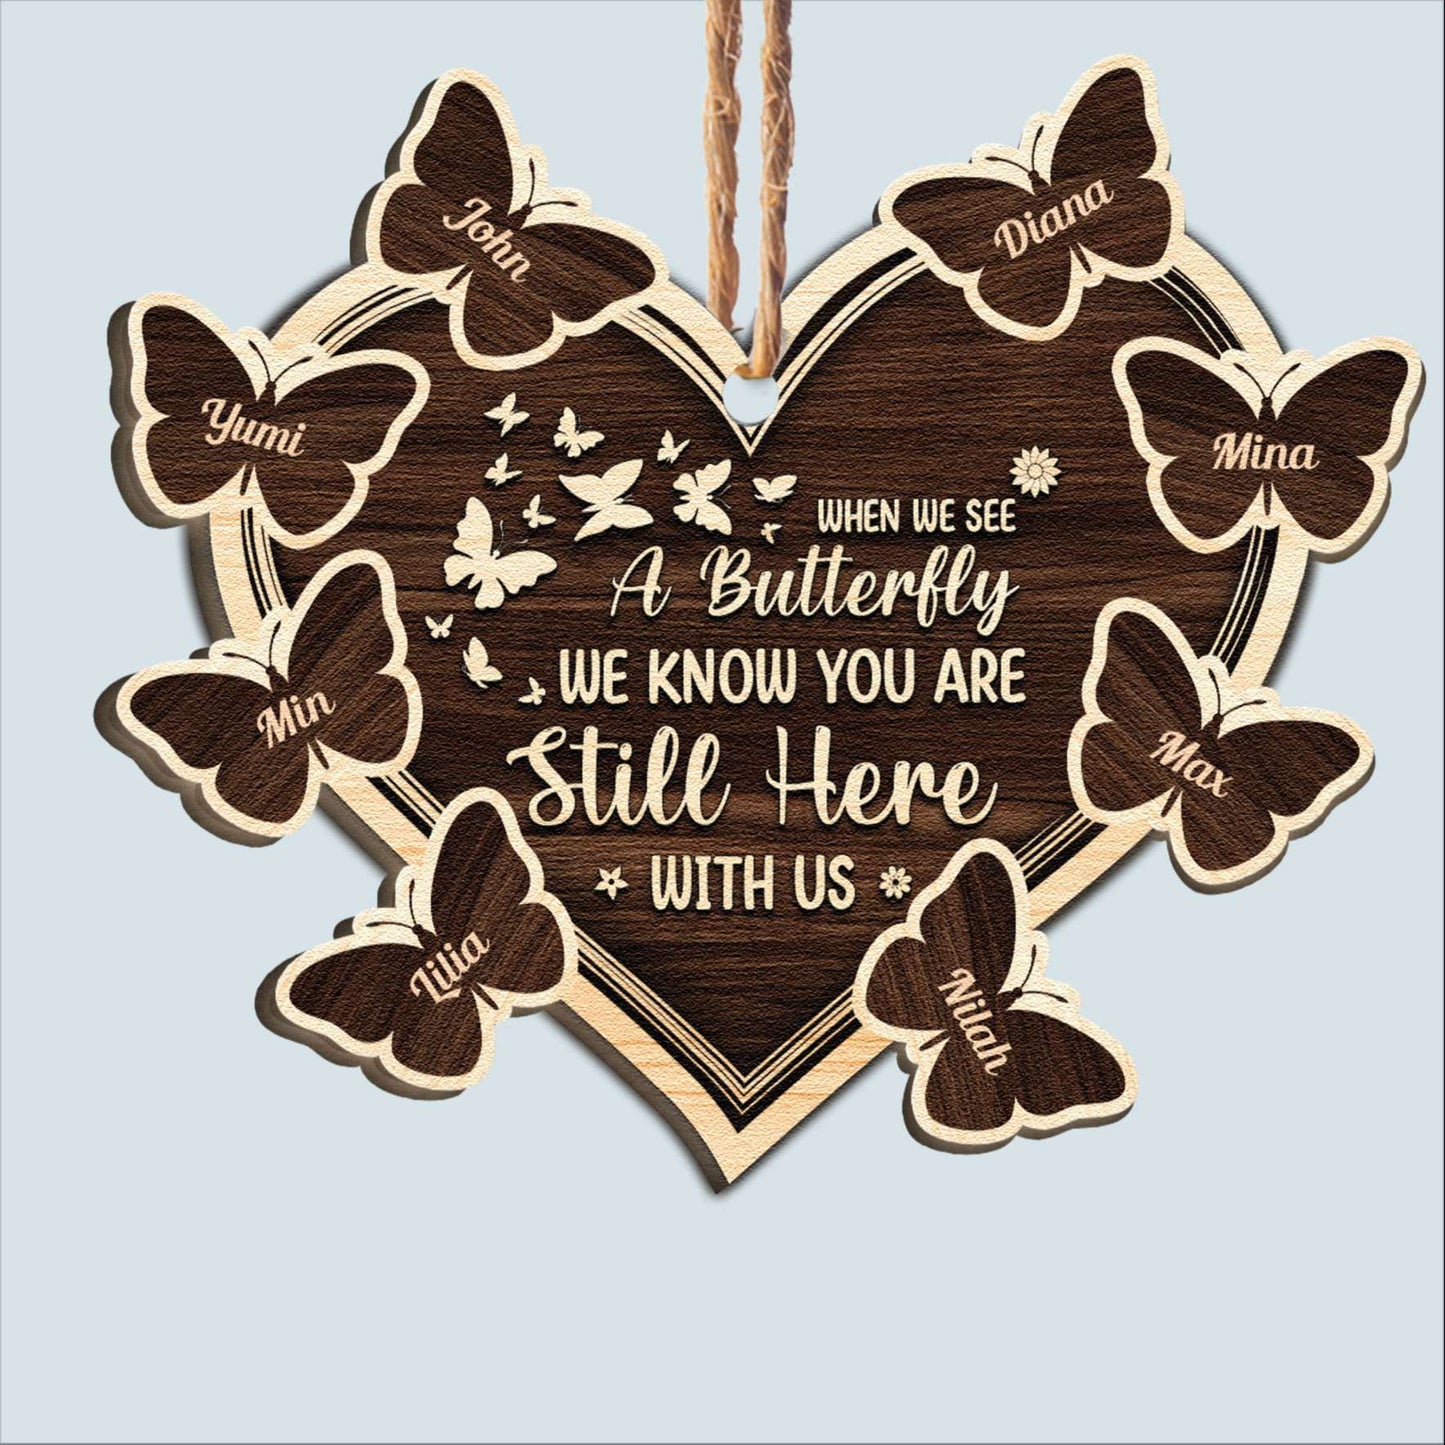 We Know You Are Still Here - Personalized Custom Shaped Wooden Ornament - Memorial Gift For Family Members, The Beloved Ones